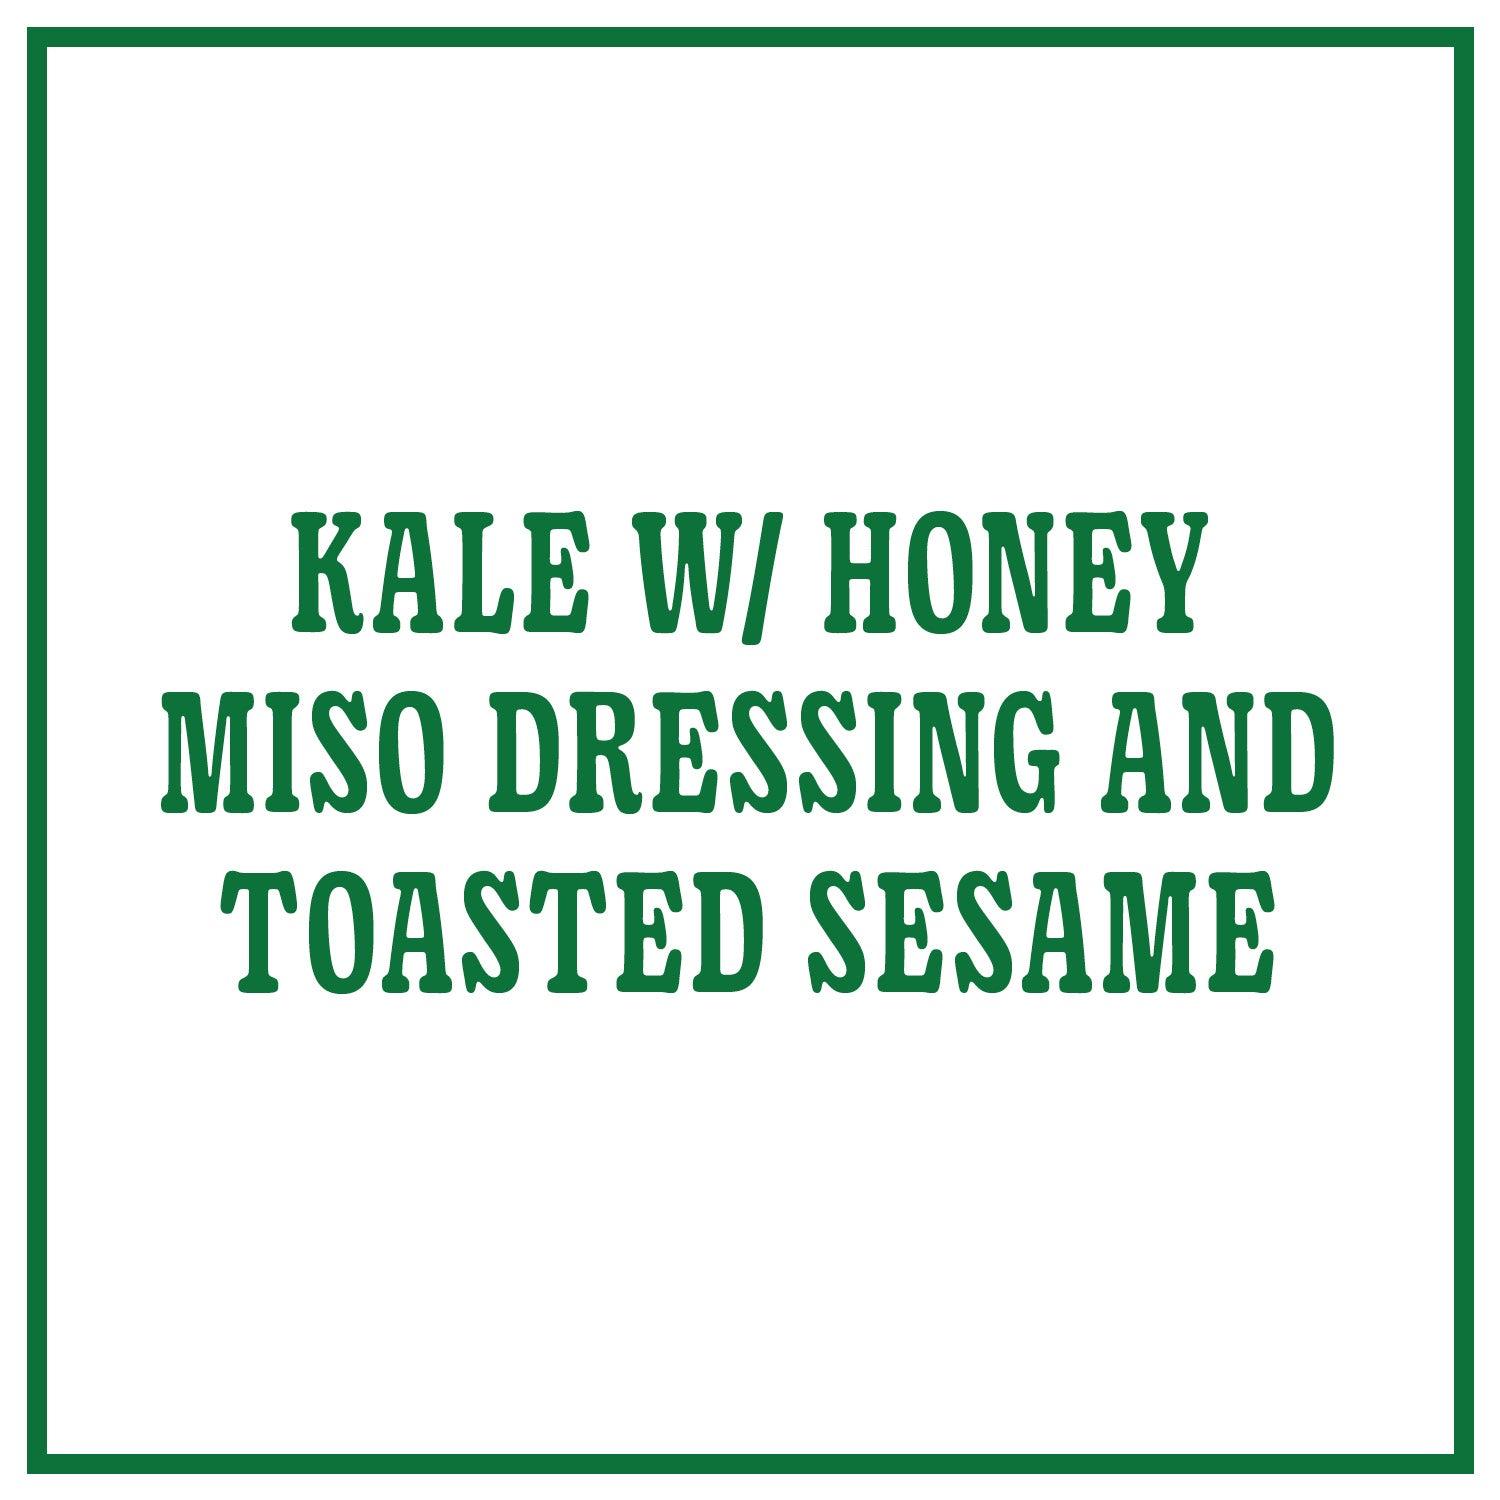 Kale with Honey Miso Dressing and Toasted Sesame